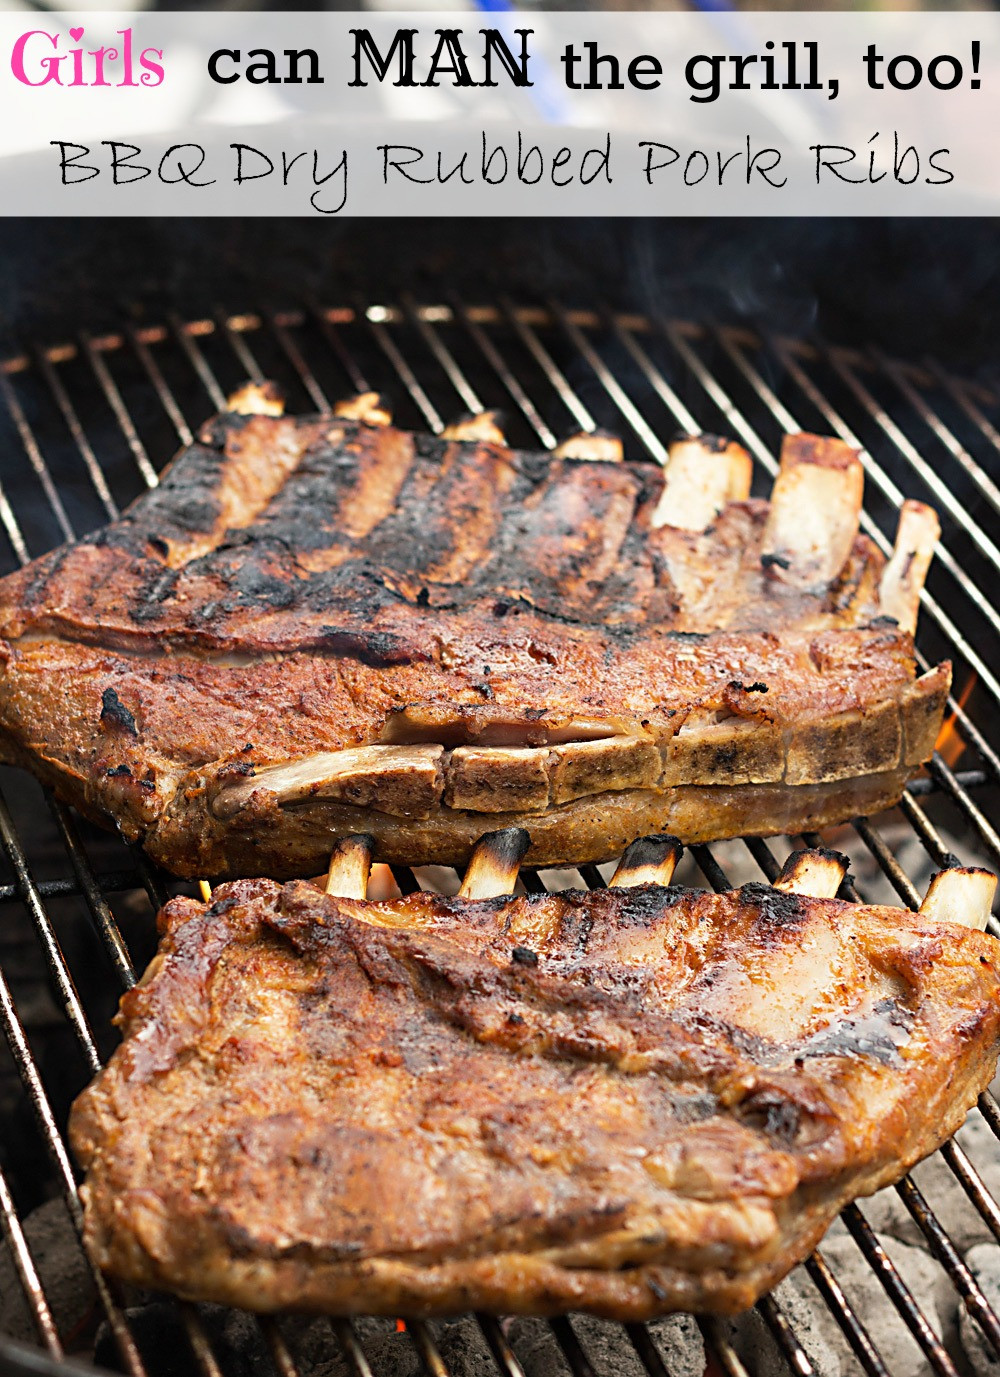 Grilled Pork Ribs Recipe
 Girls Can MAN the Grill Pork Ribs Recipe ReadySetRibs ad